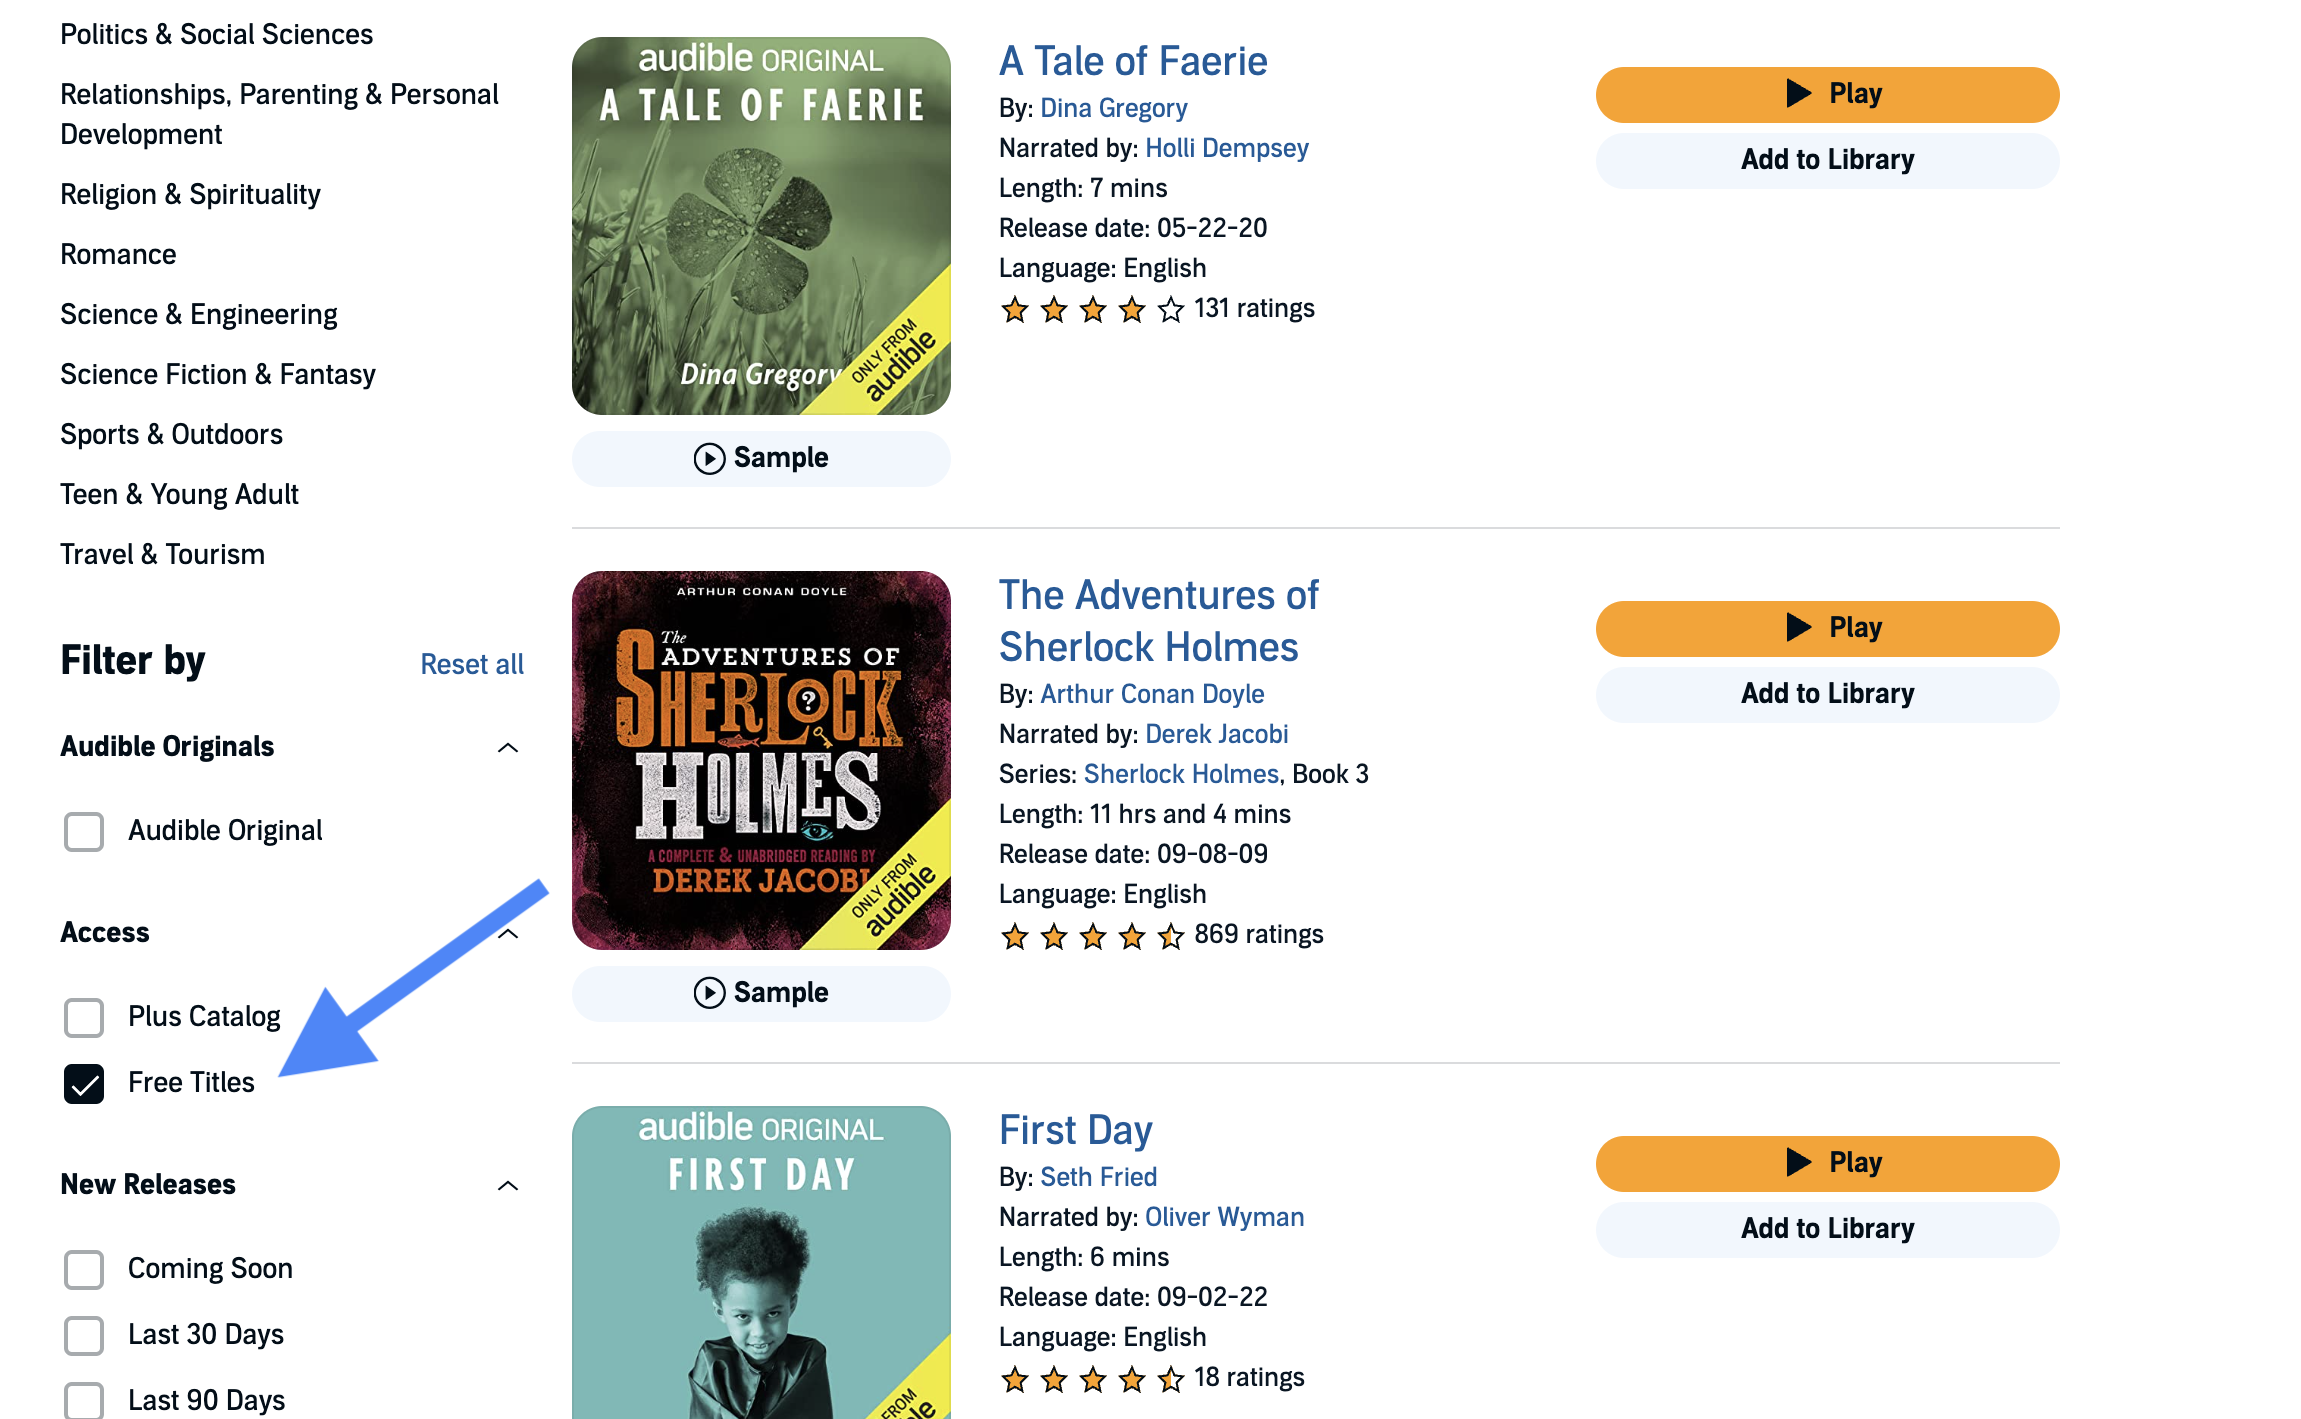 Audiobooks page with "Free Titles" checked off in lefthand sidebar